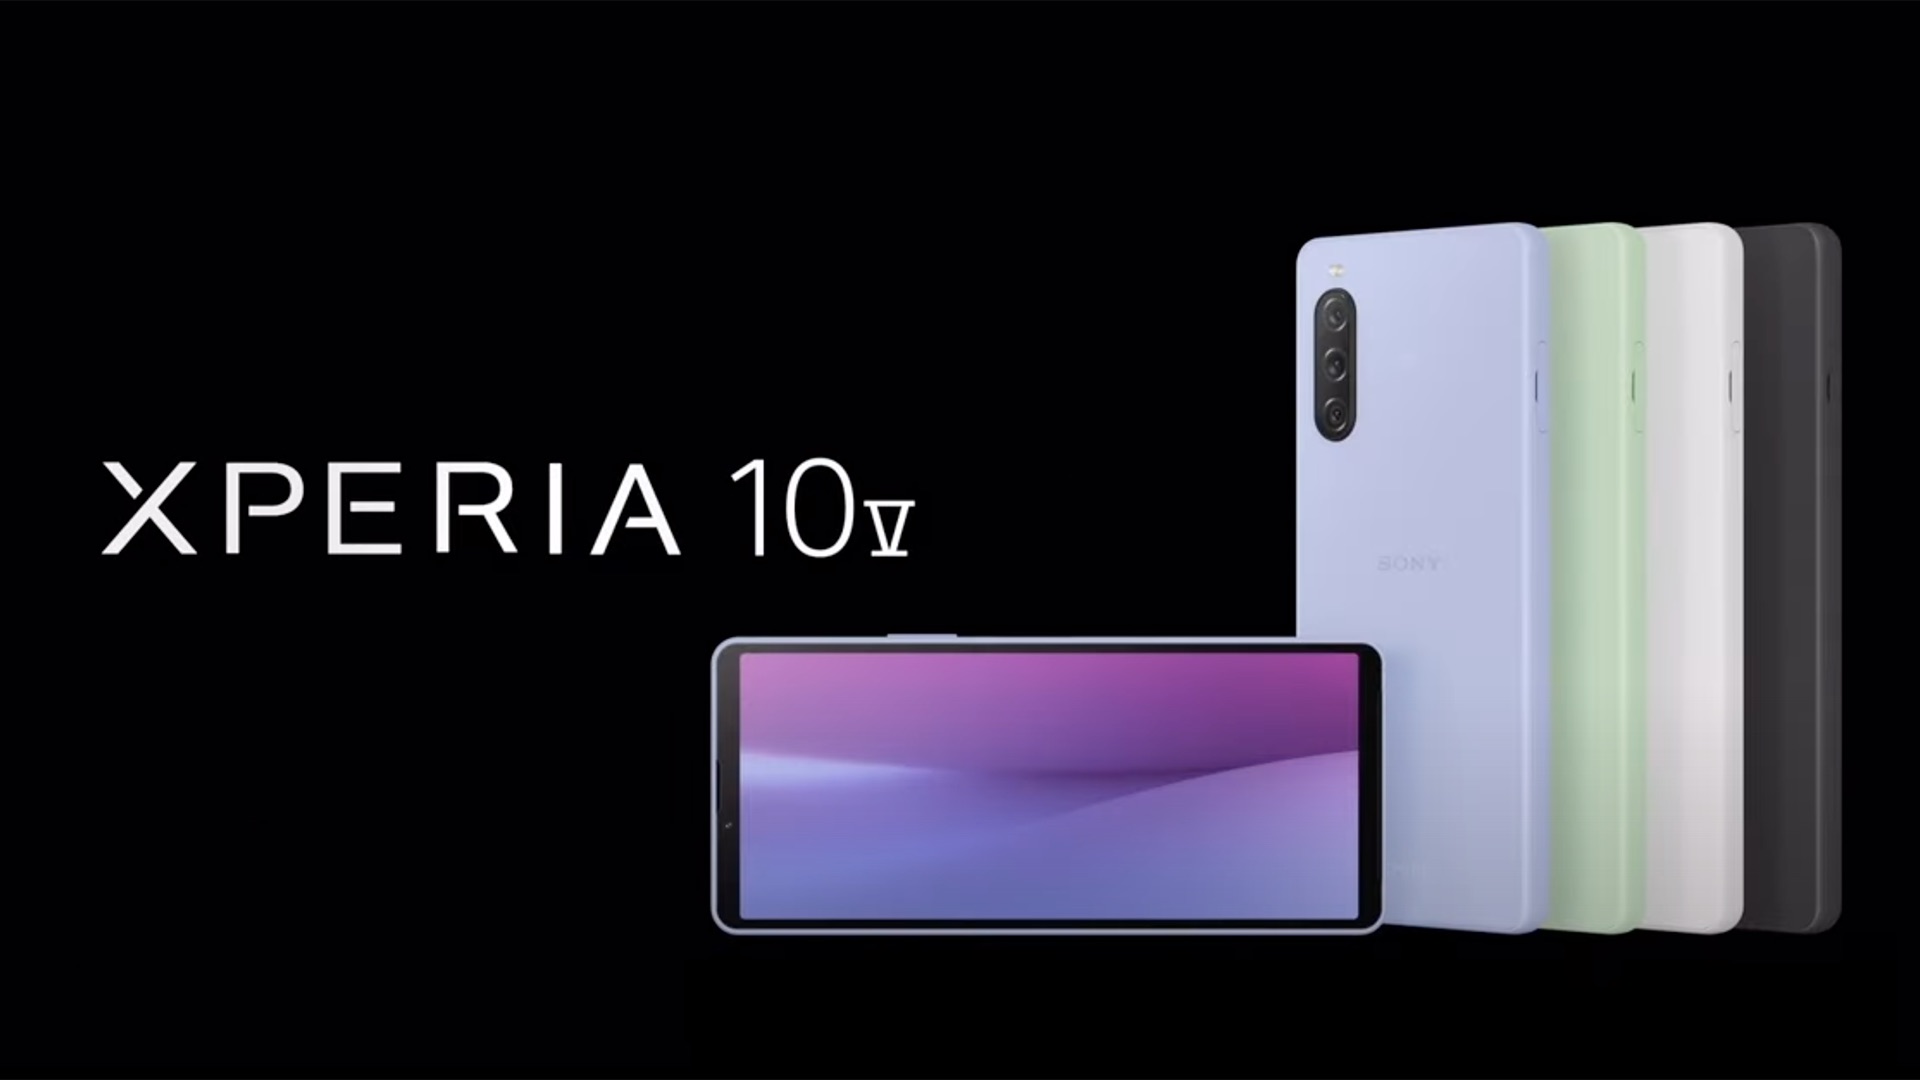 Sony Xperia 1 V Flagship and Xperia 10 V Entry-Level Phones Introduced